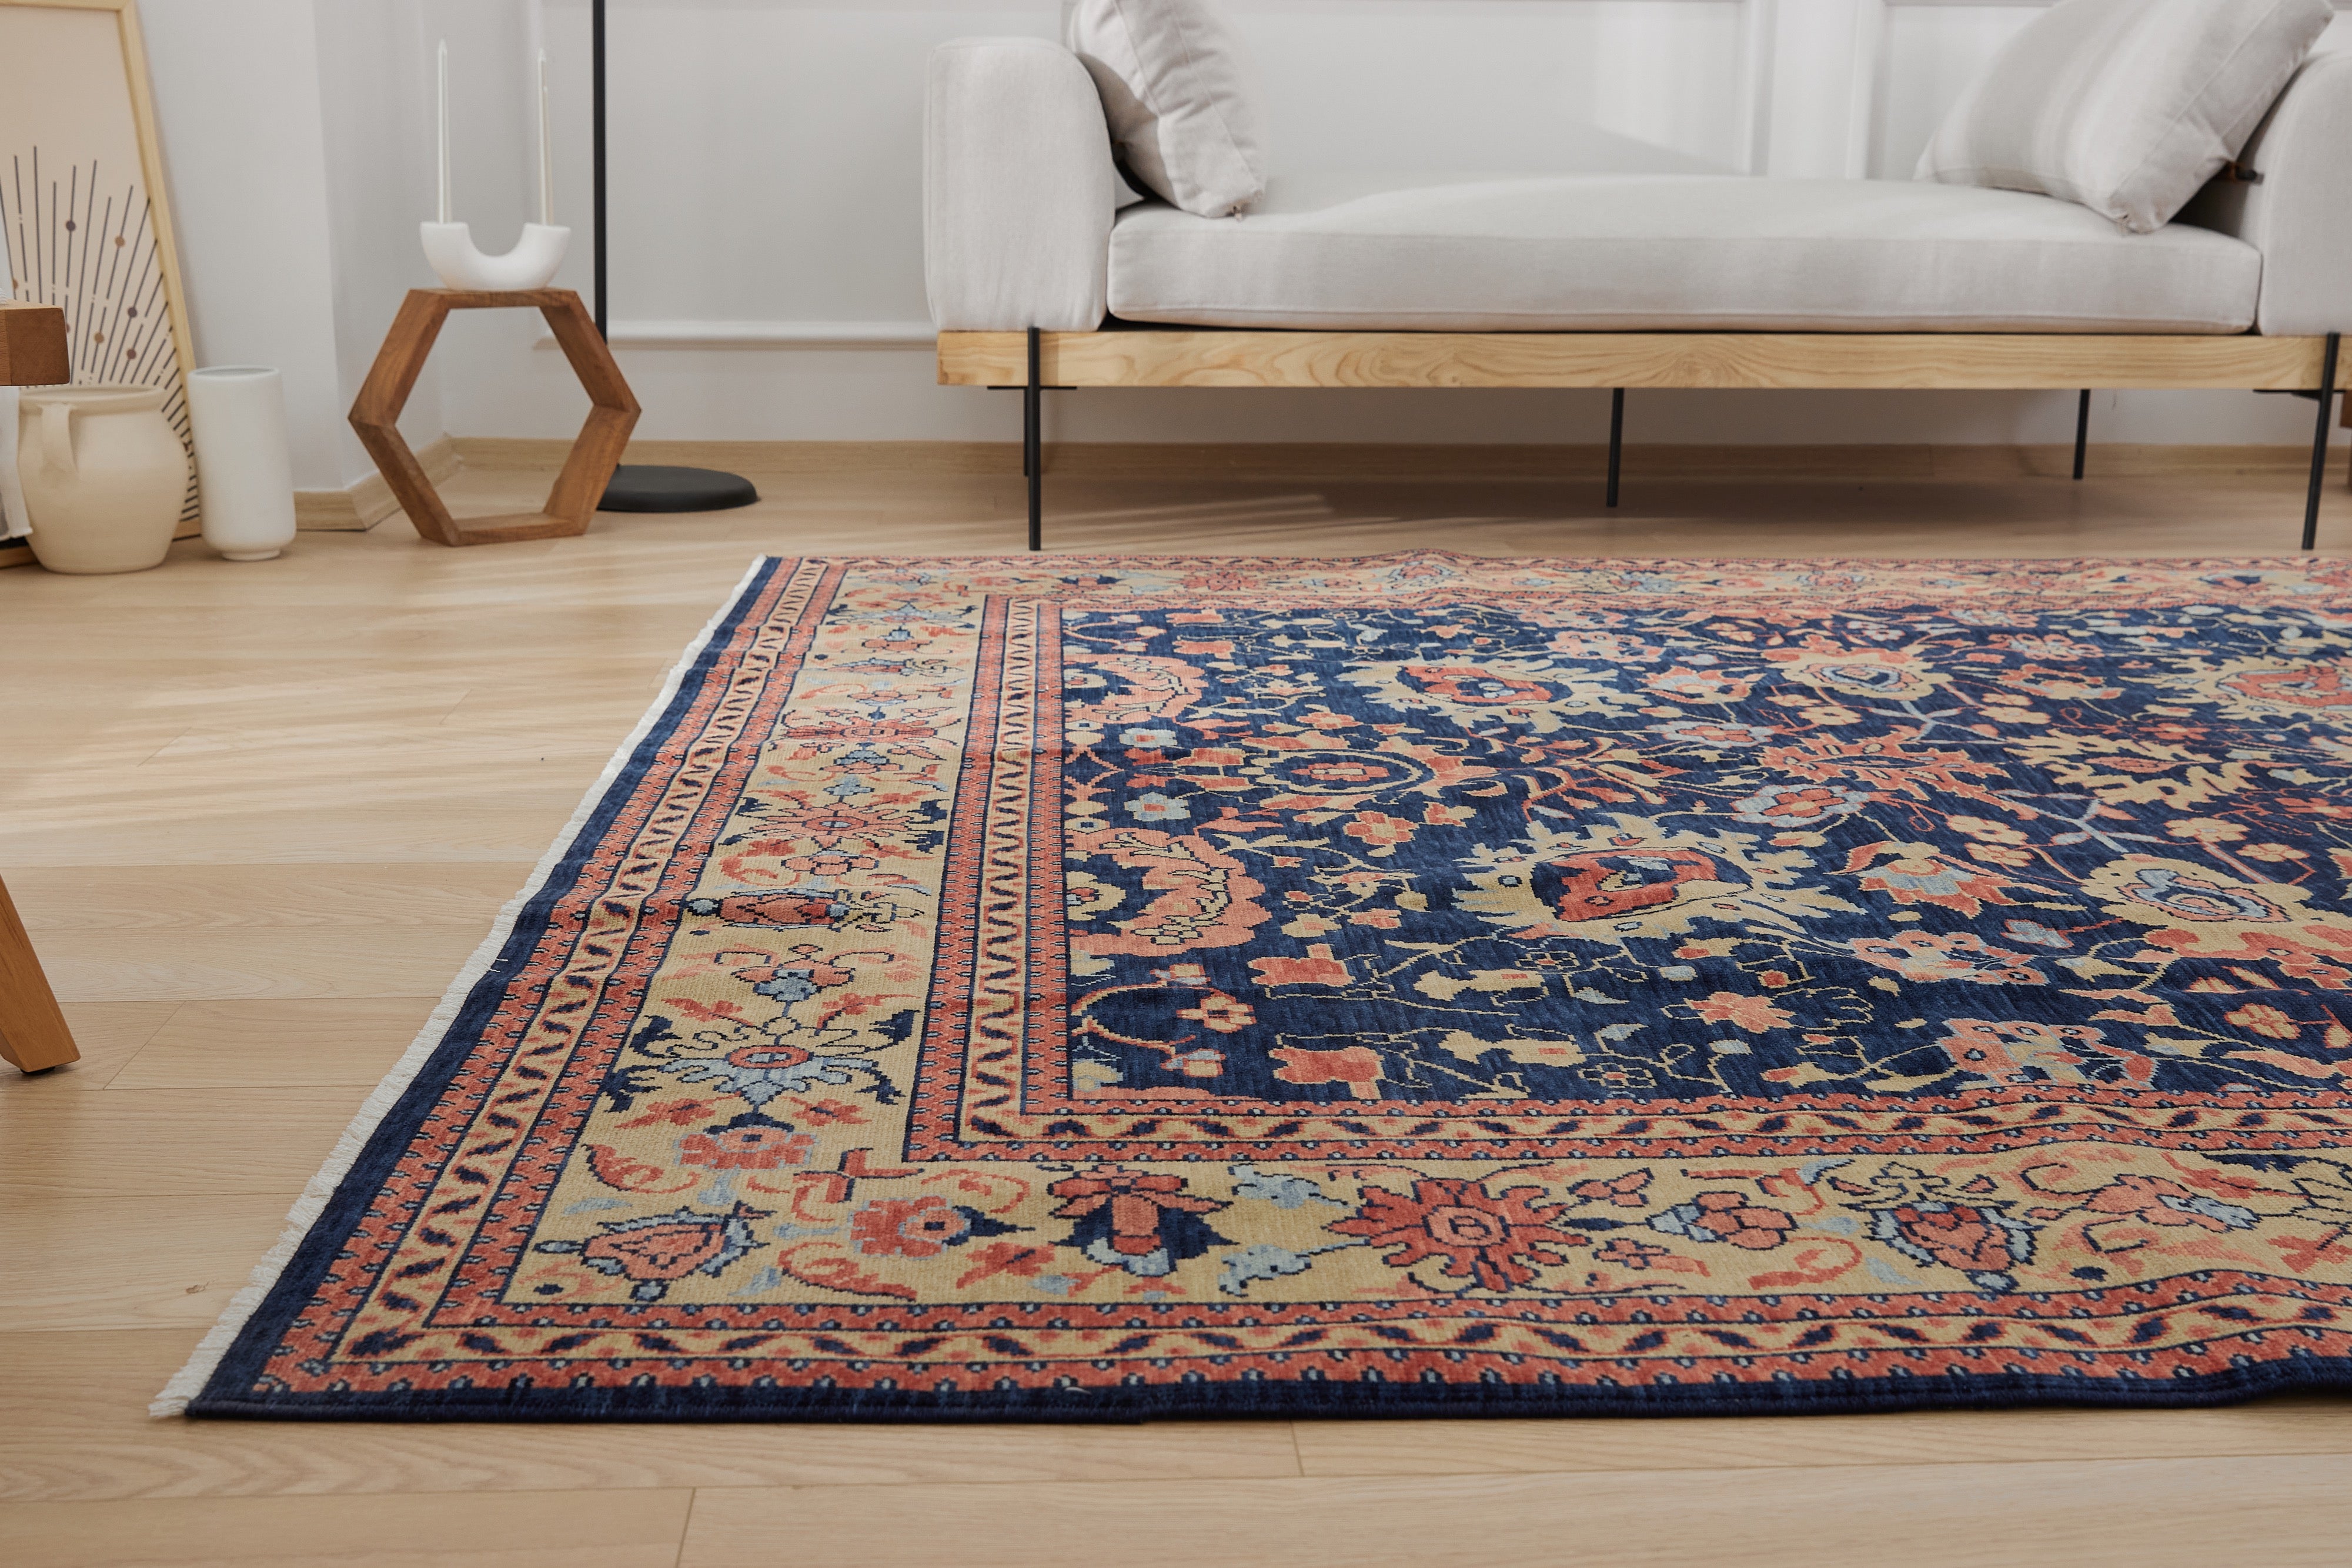 Ayleen - Synthesis of Heritage and Contemporary Rug StylesAyleen - Synthesis of Heritage and Contemporary Rug Styles